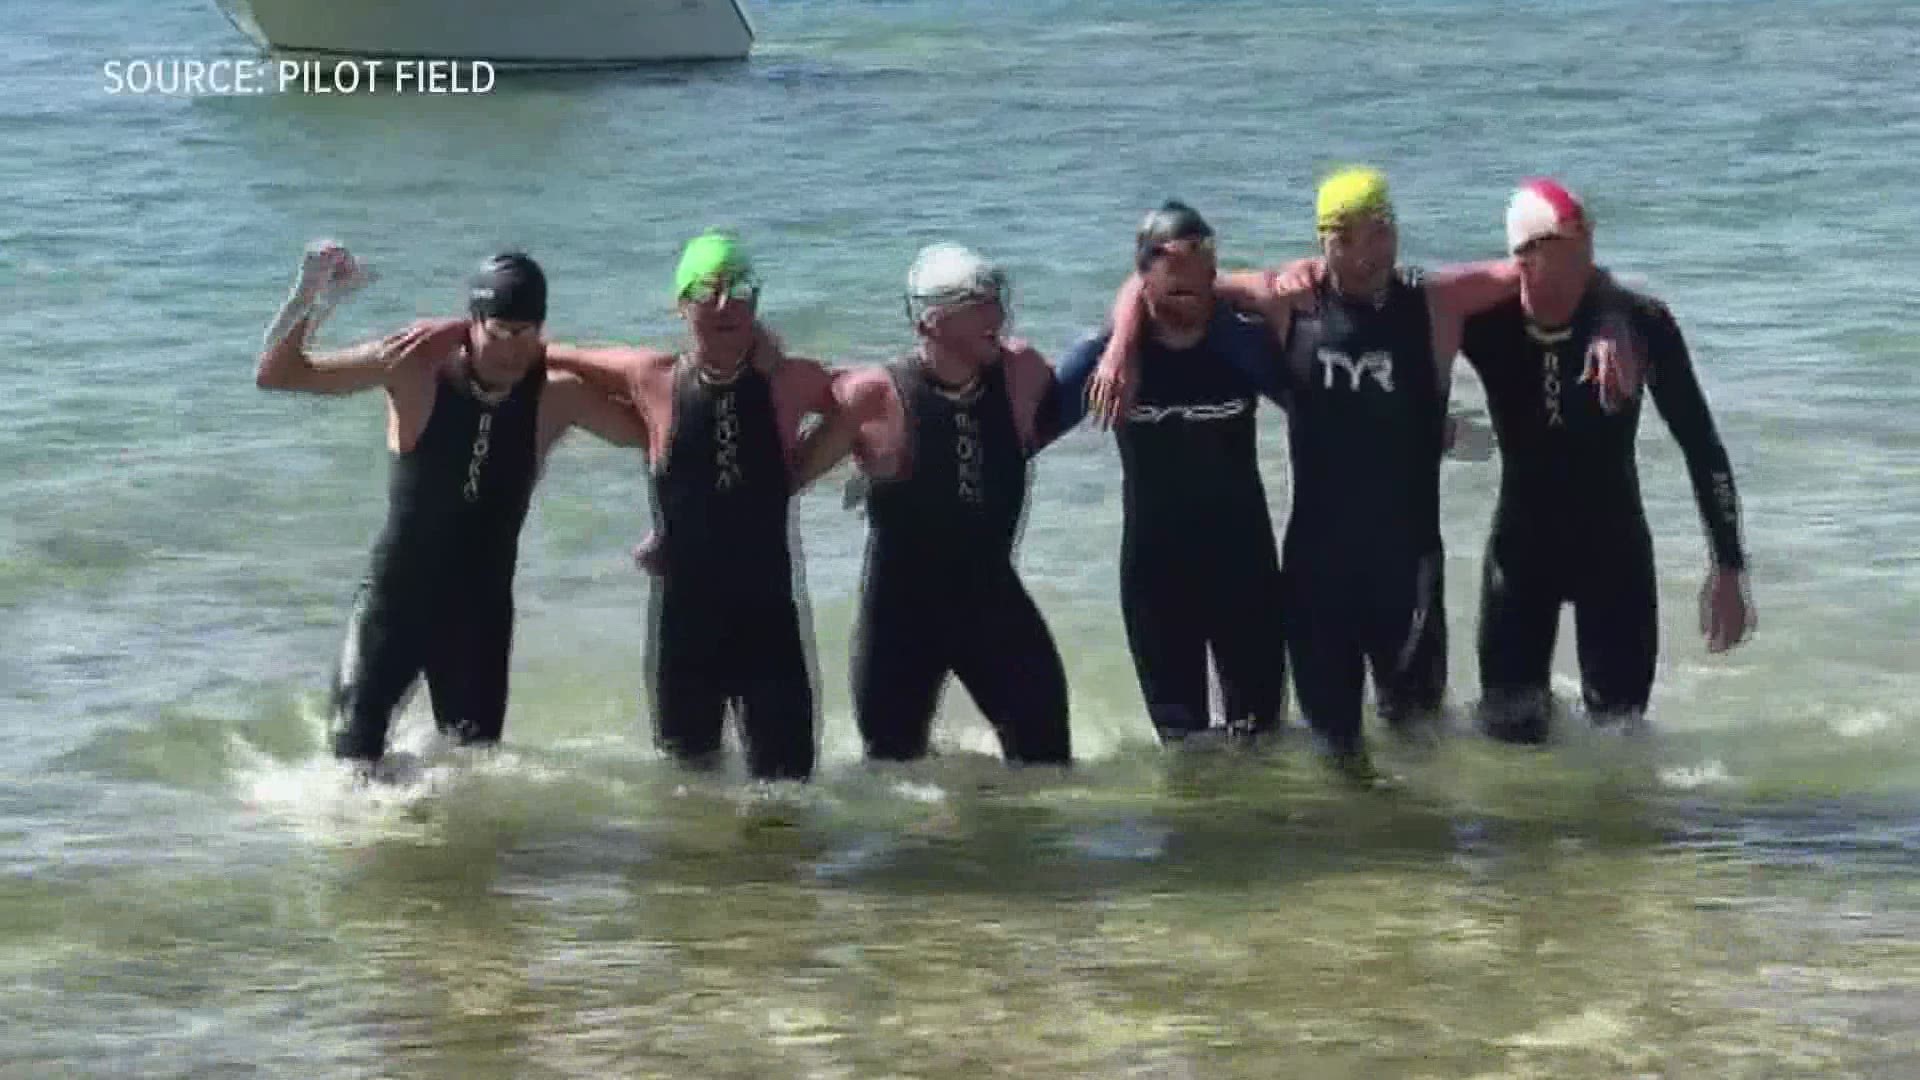 The group of six swam nearly 60 miles, from Wisconsin to Ludington in just 20 hours and 50 minutes.